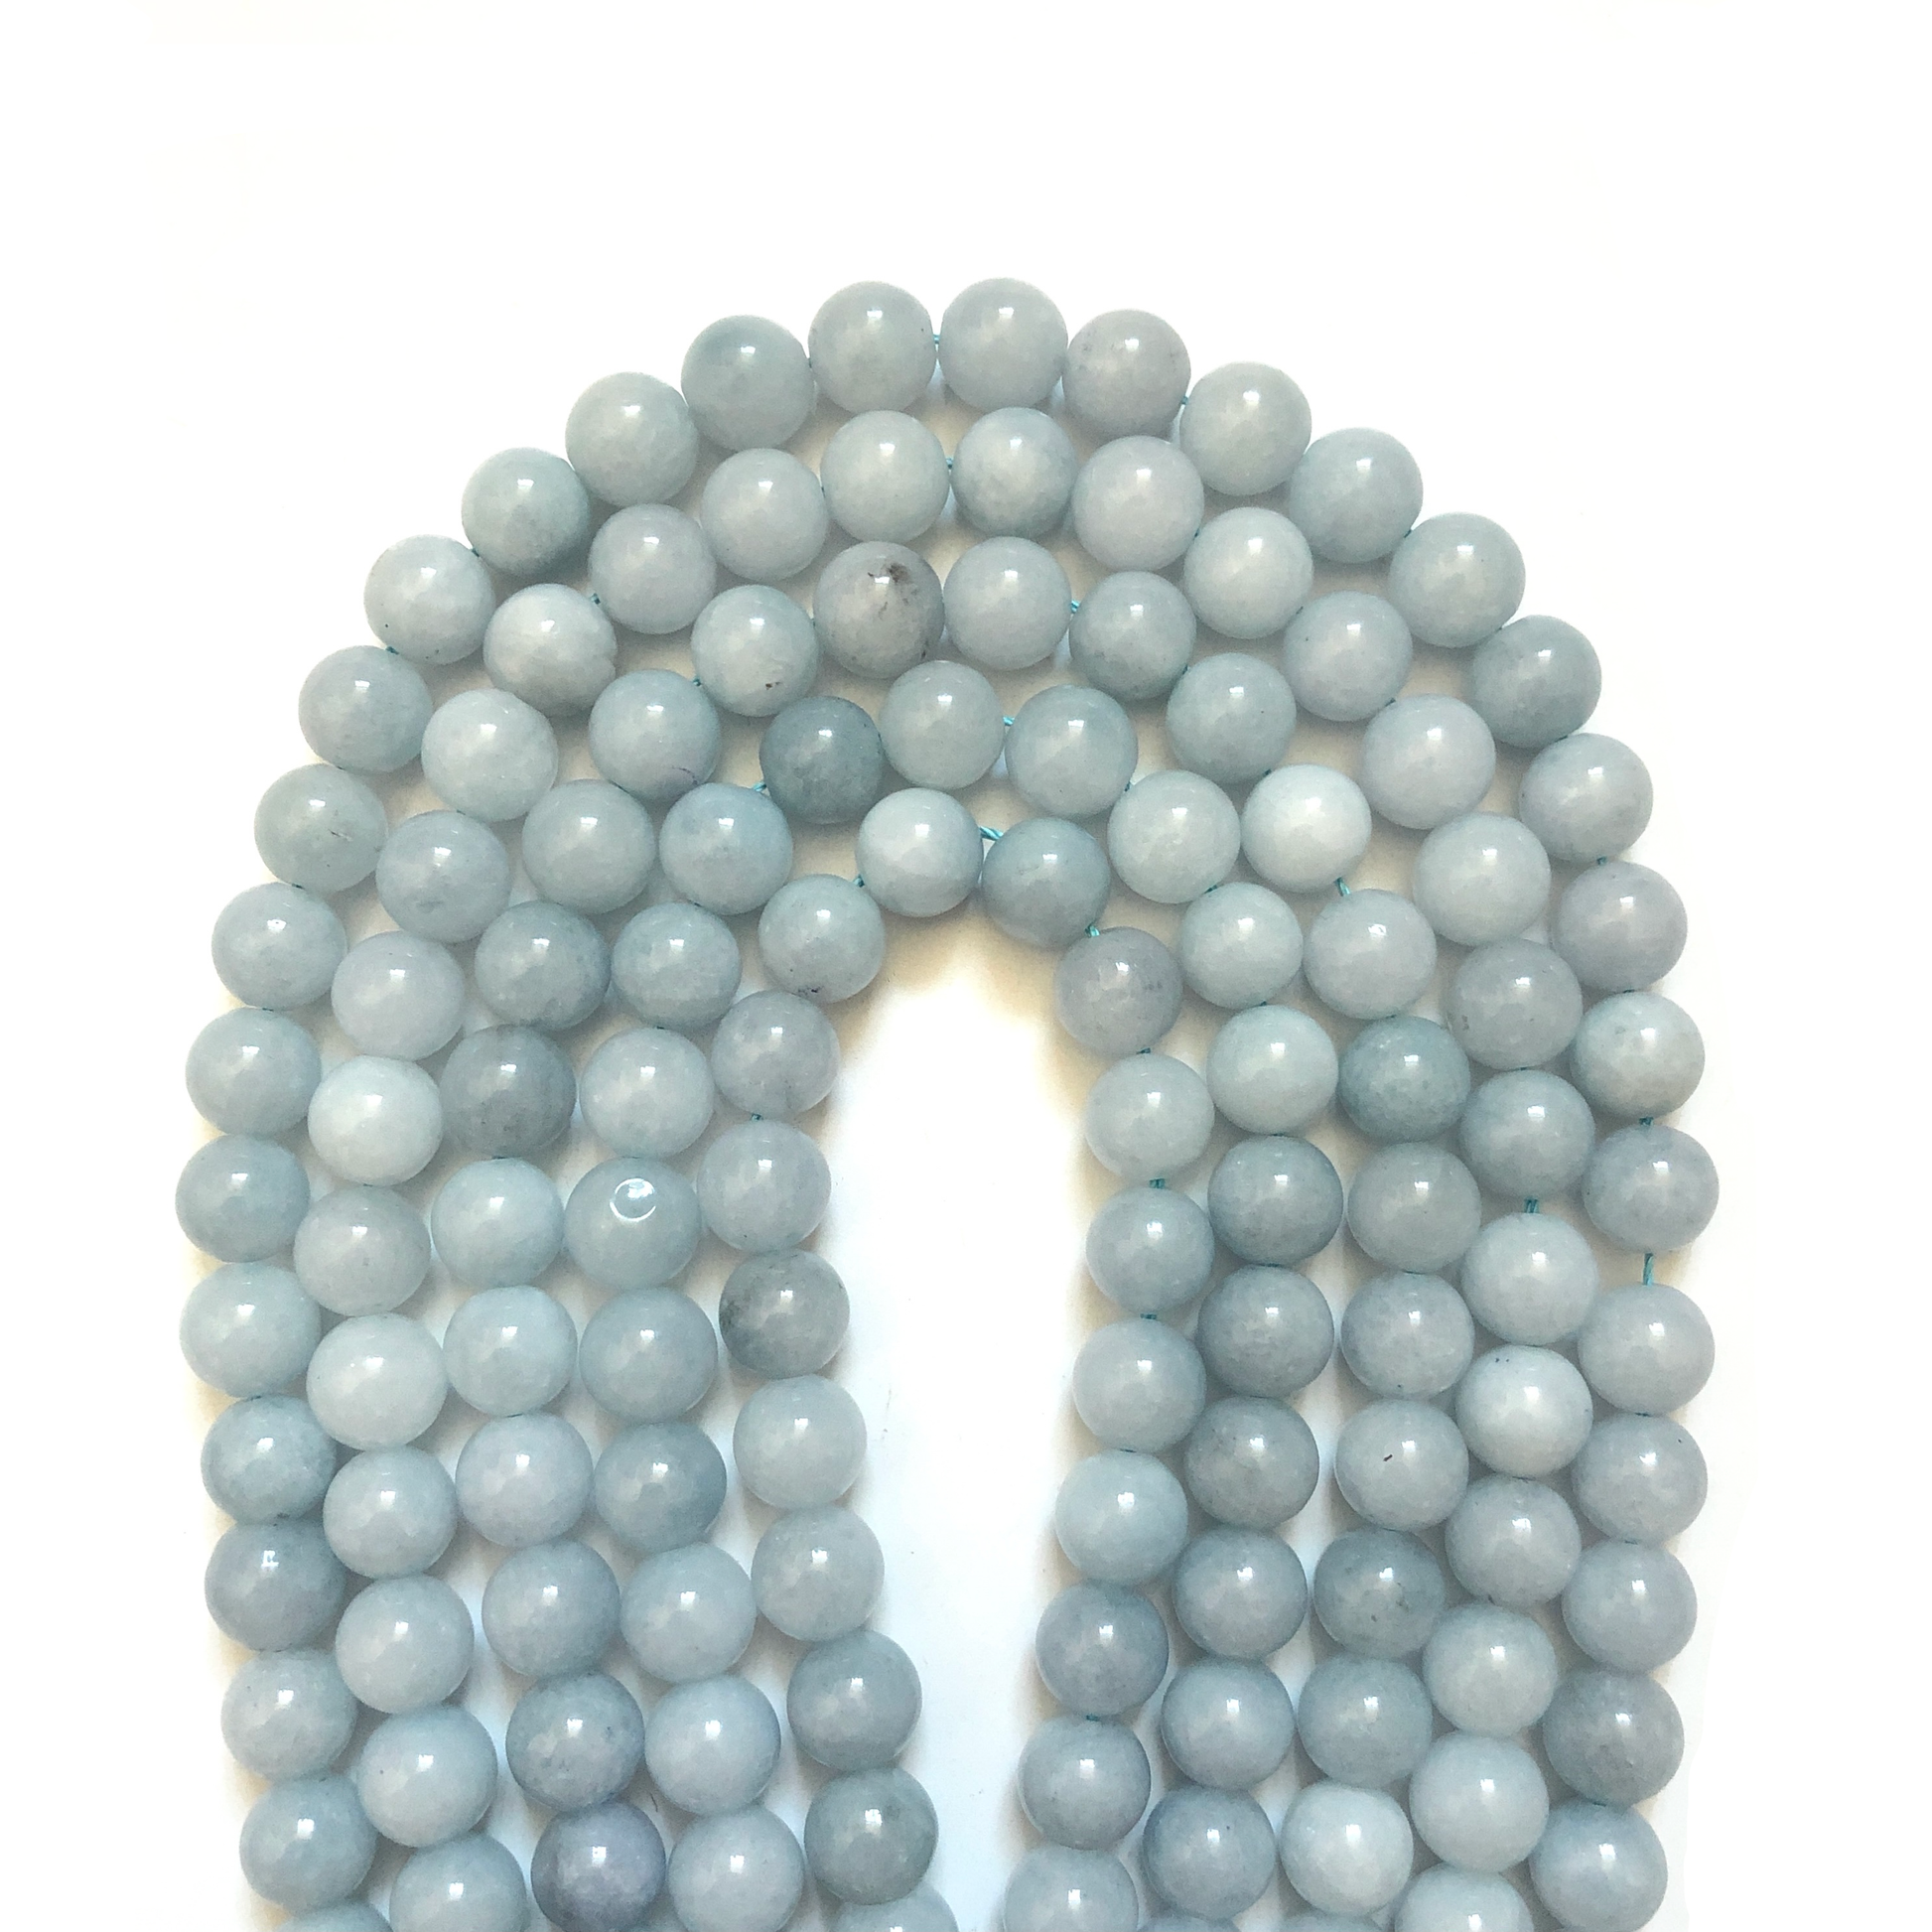 2 Strands/lot 10mm Light Blue Aquamarines Round Stone Beads Stone Beads New Beads Arrivals Other Stone Beads Charms Beads Beyond